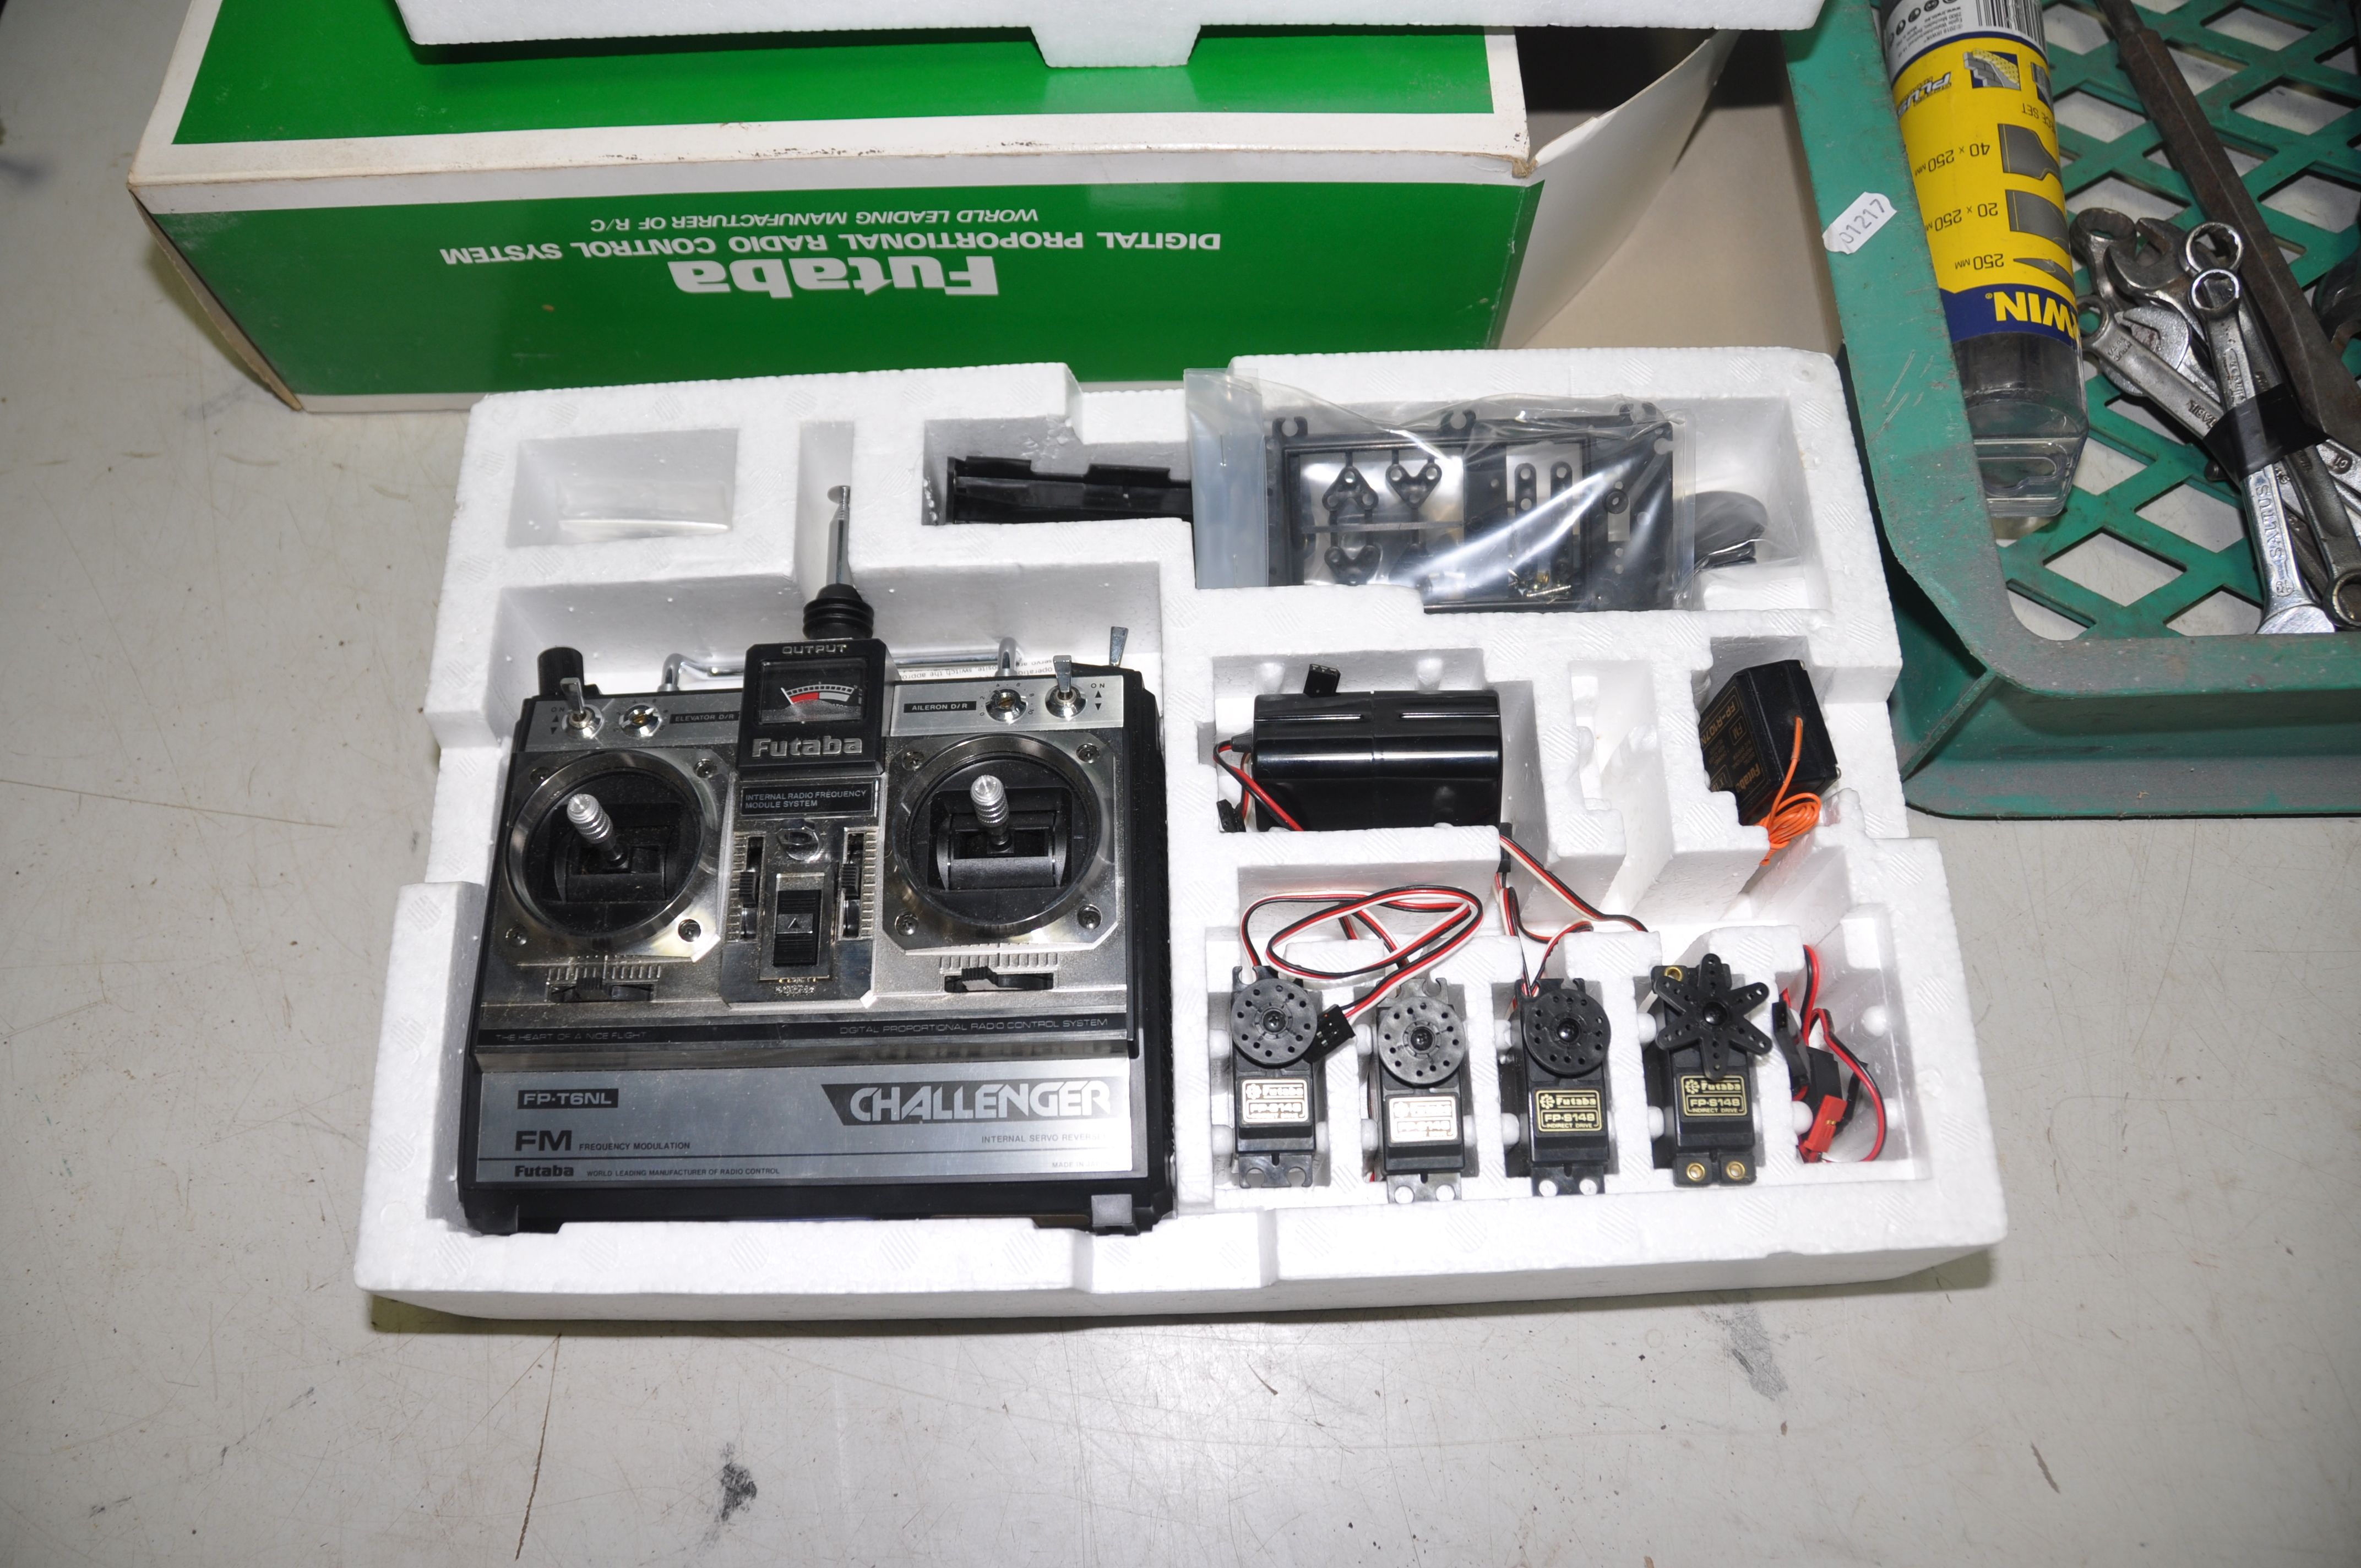 A FUTABA FP-T6NL CHALLENGER DIGITAL RADIO CONTROL SYSTEM in original box all parts and spares appear - Image 4 of 8